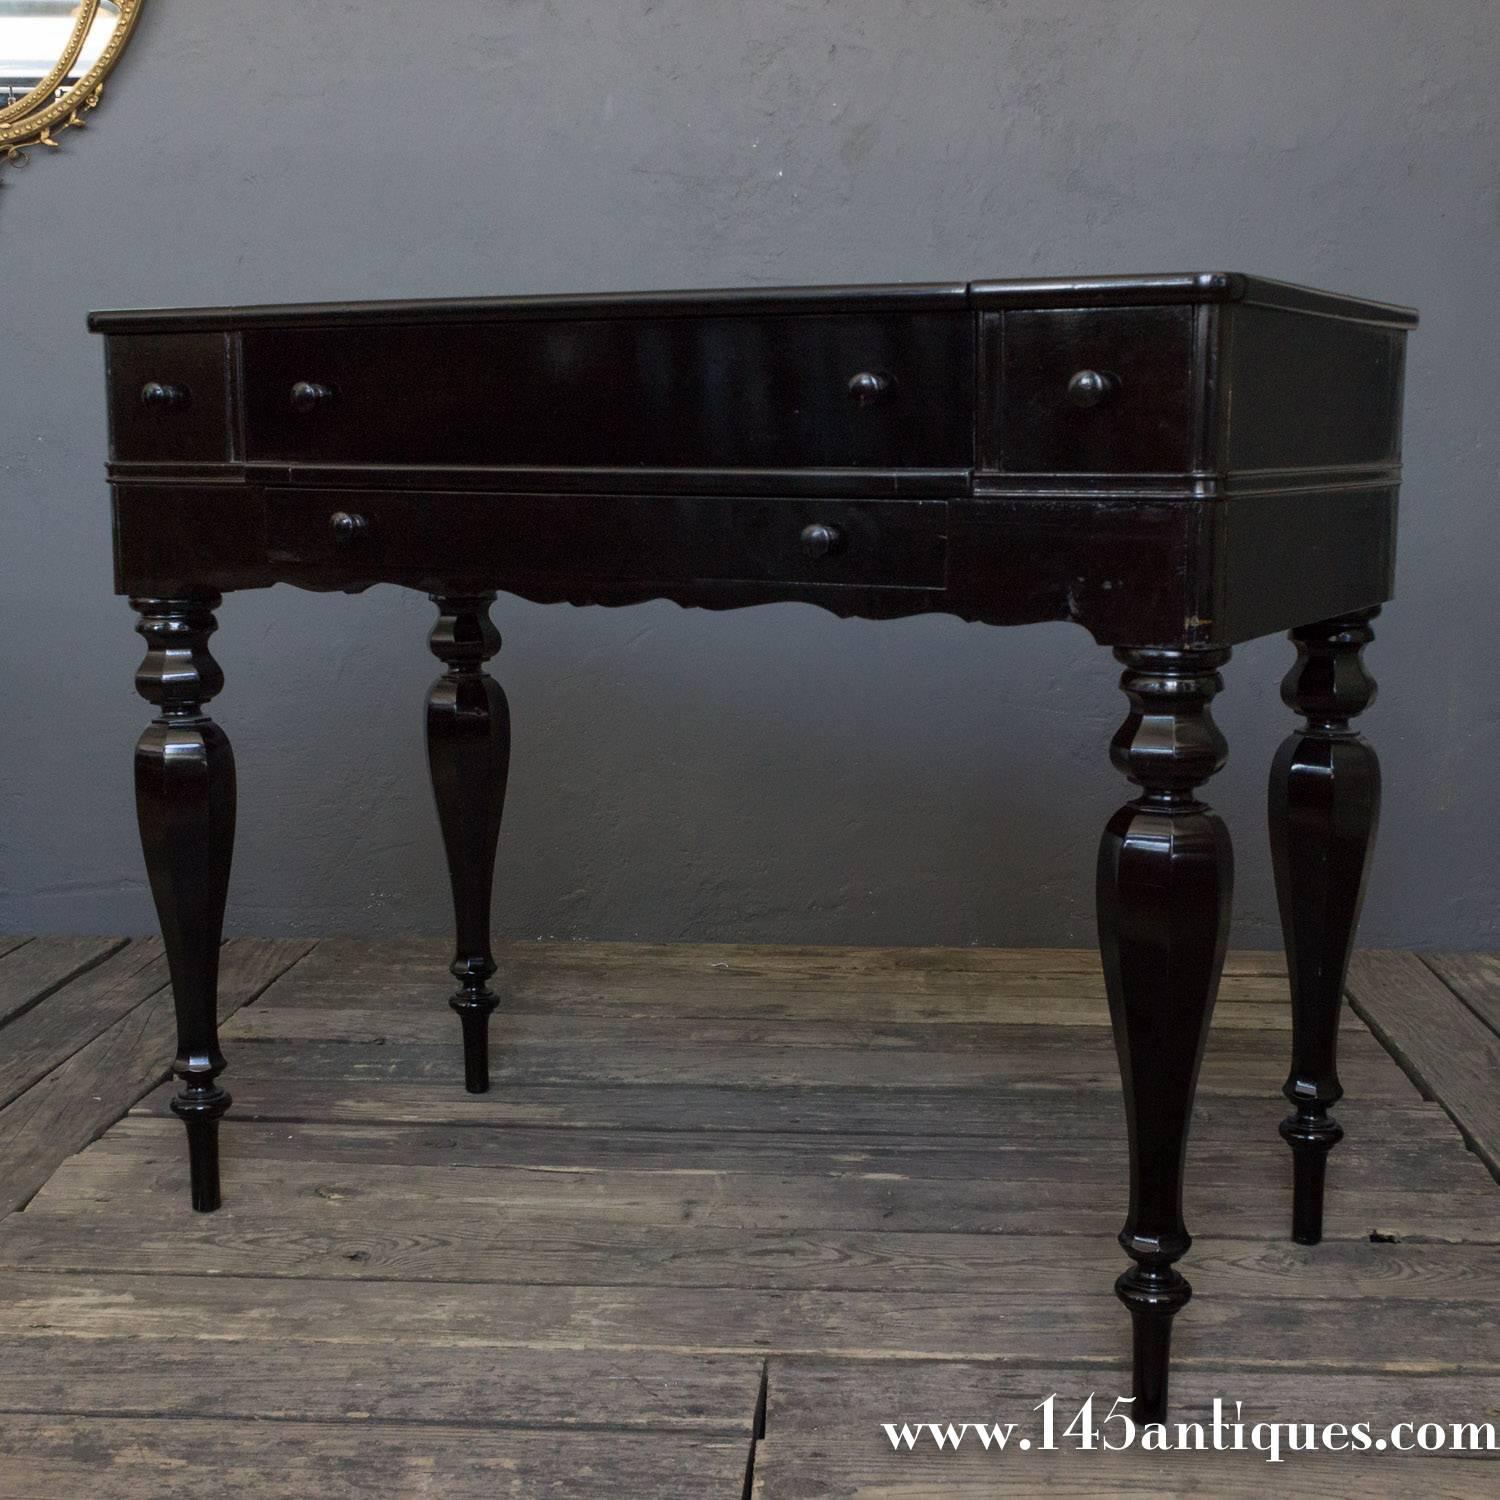 American 1920s new-classical ebonized drop top desk. It has three drawers and a handled drop front for the desk. The inside has pigeon holes for letters and stationary and a drawer.